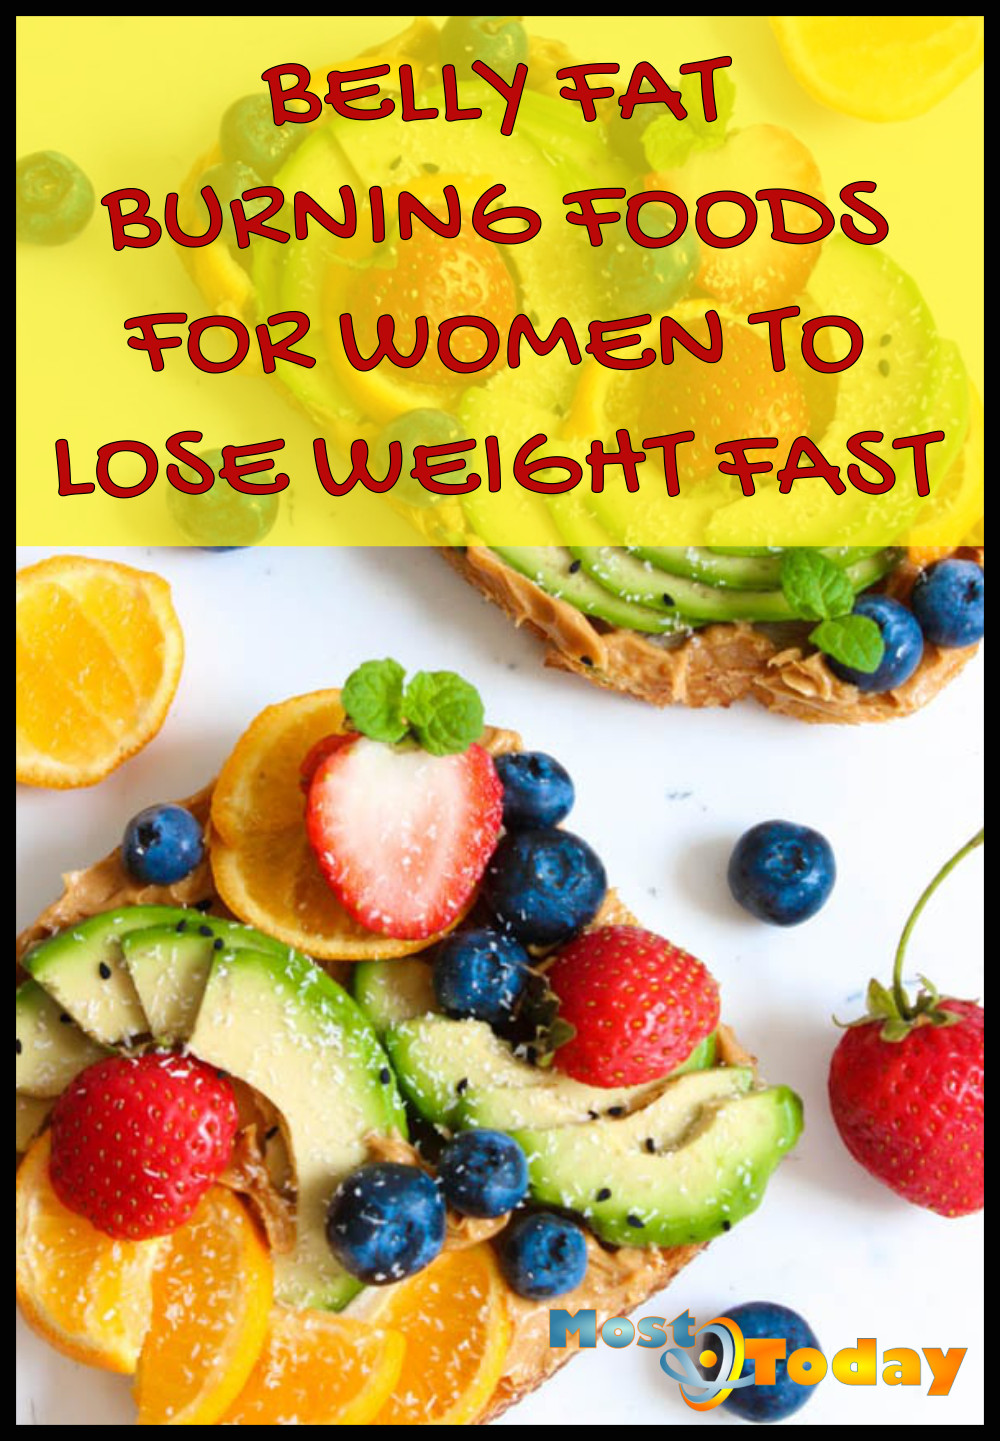 Weight Loss For Men Lose Belly Fat Burning Foods
 BELLY FAT BURNING FOODS FOR WOMEN TO LOSE WEIGHT FAST